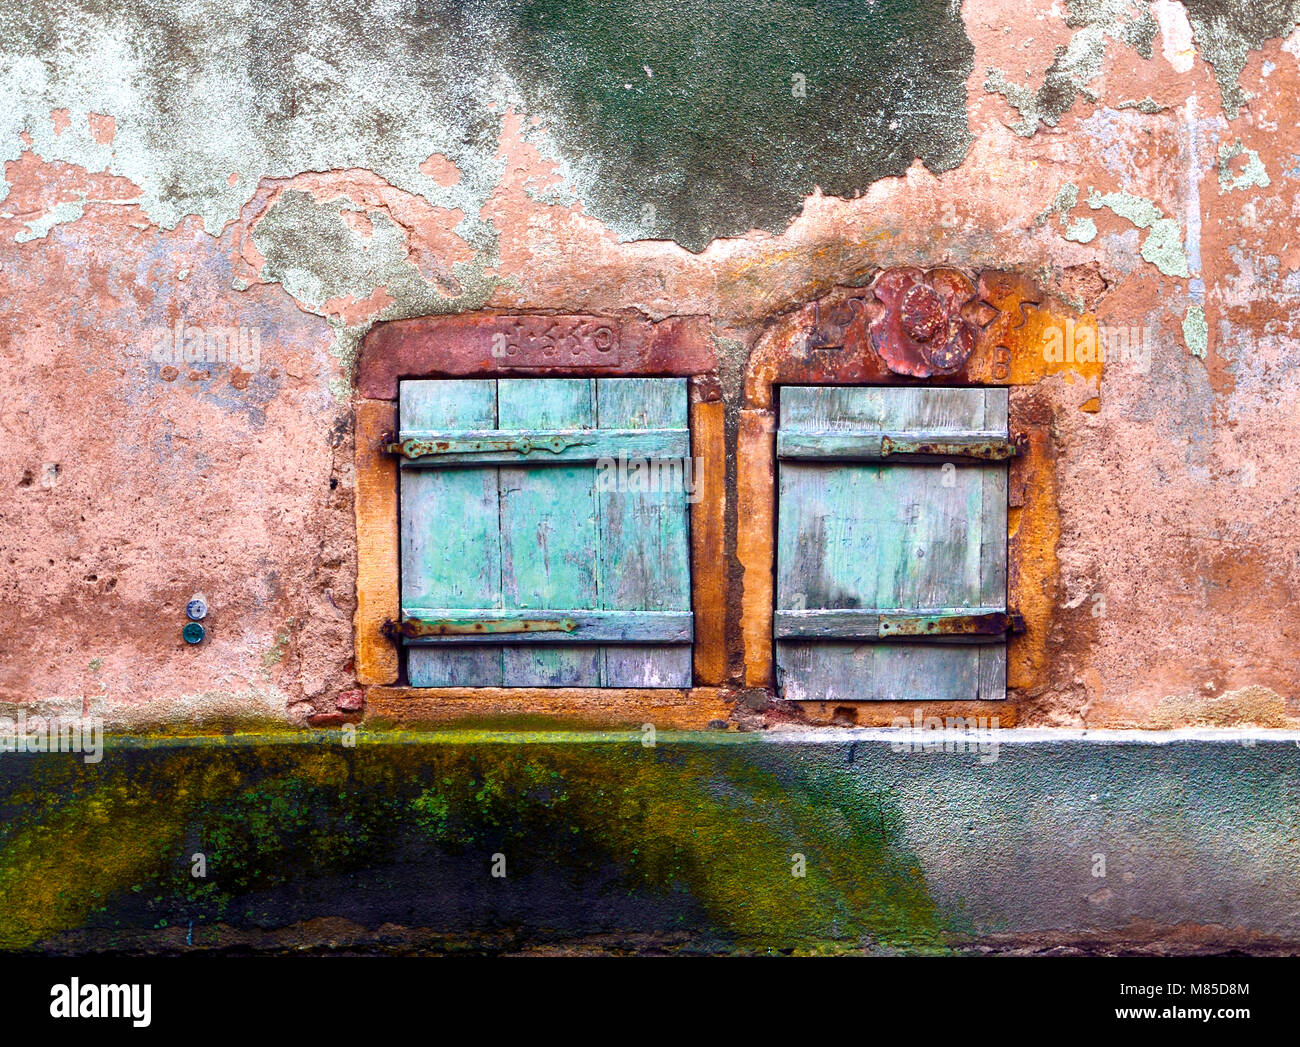 A close up view of part of a colorful window of a medieval house in Turckheim, Alsace, France Stock Photo